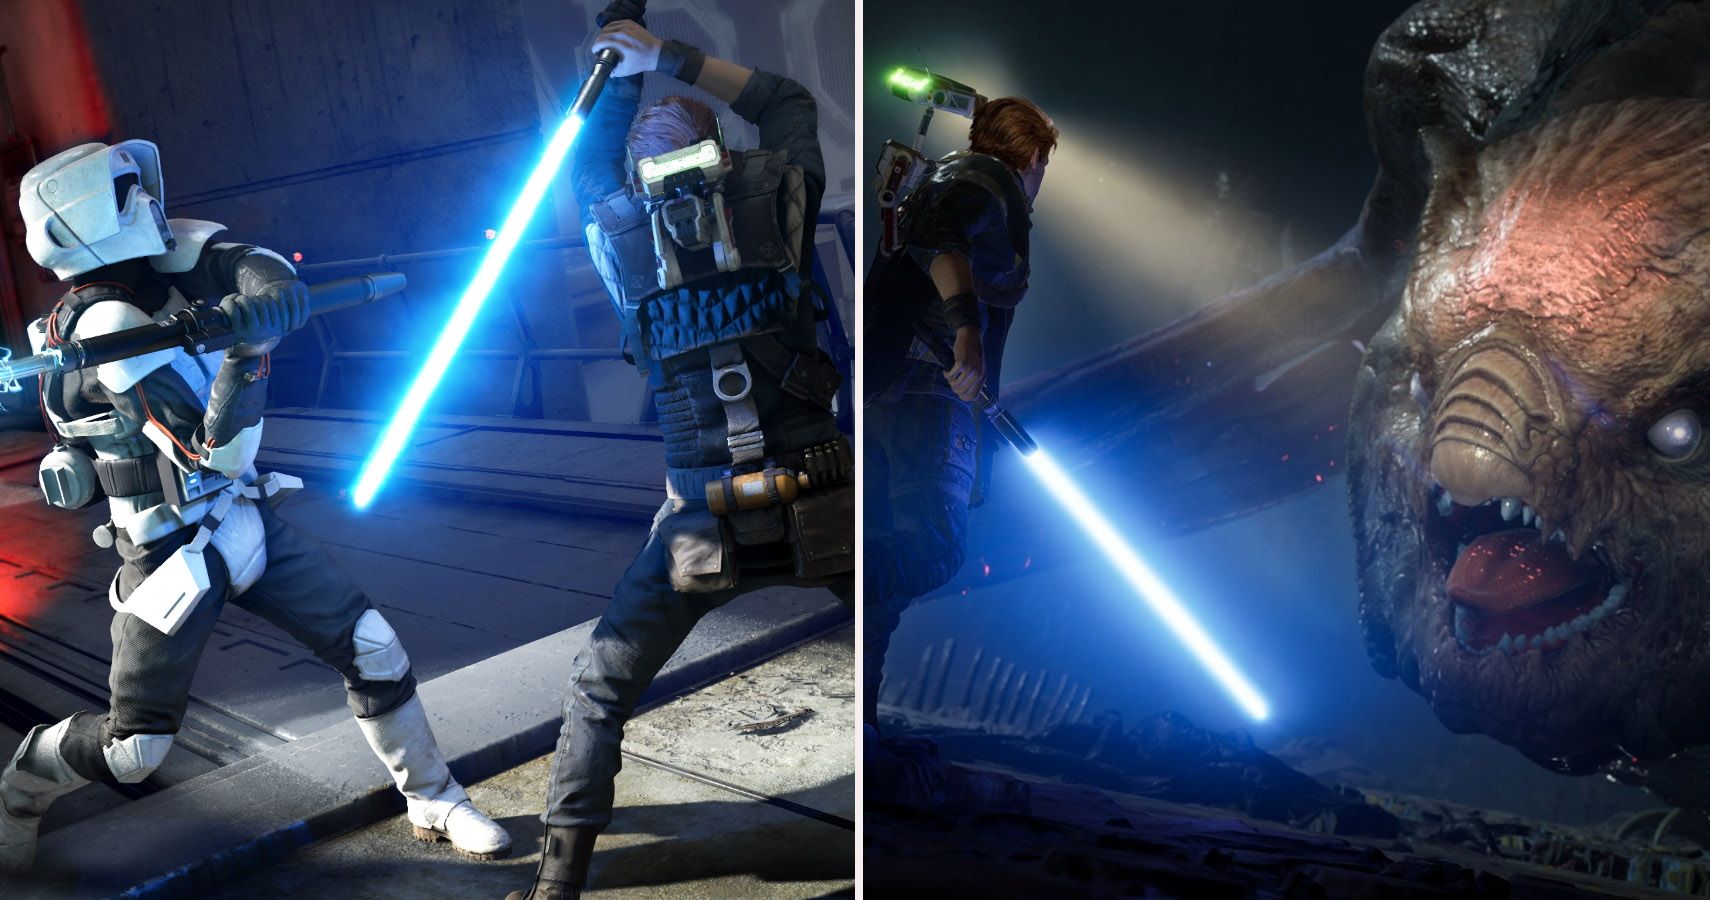 Star Wars Jedi: Fallen Order - 5 things we want in a sequel